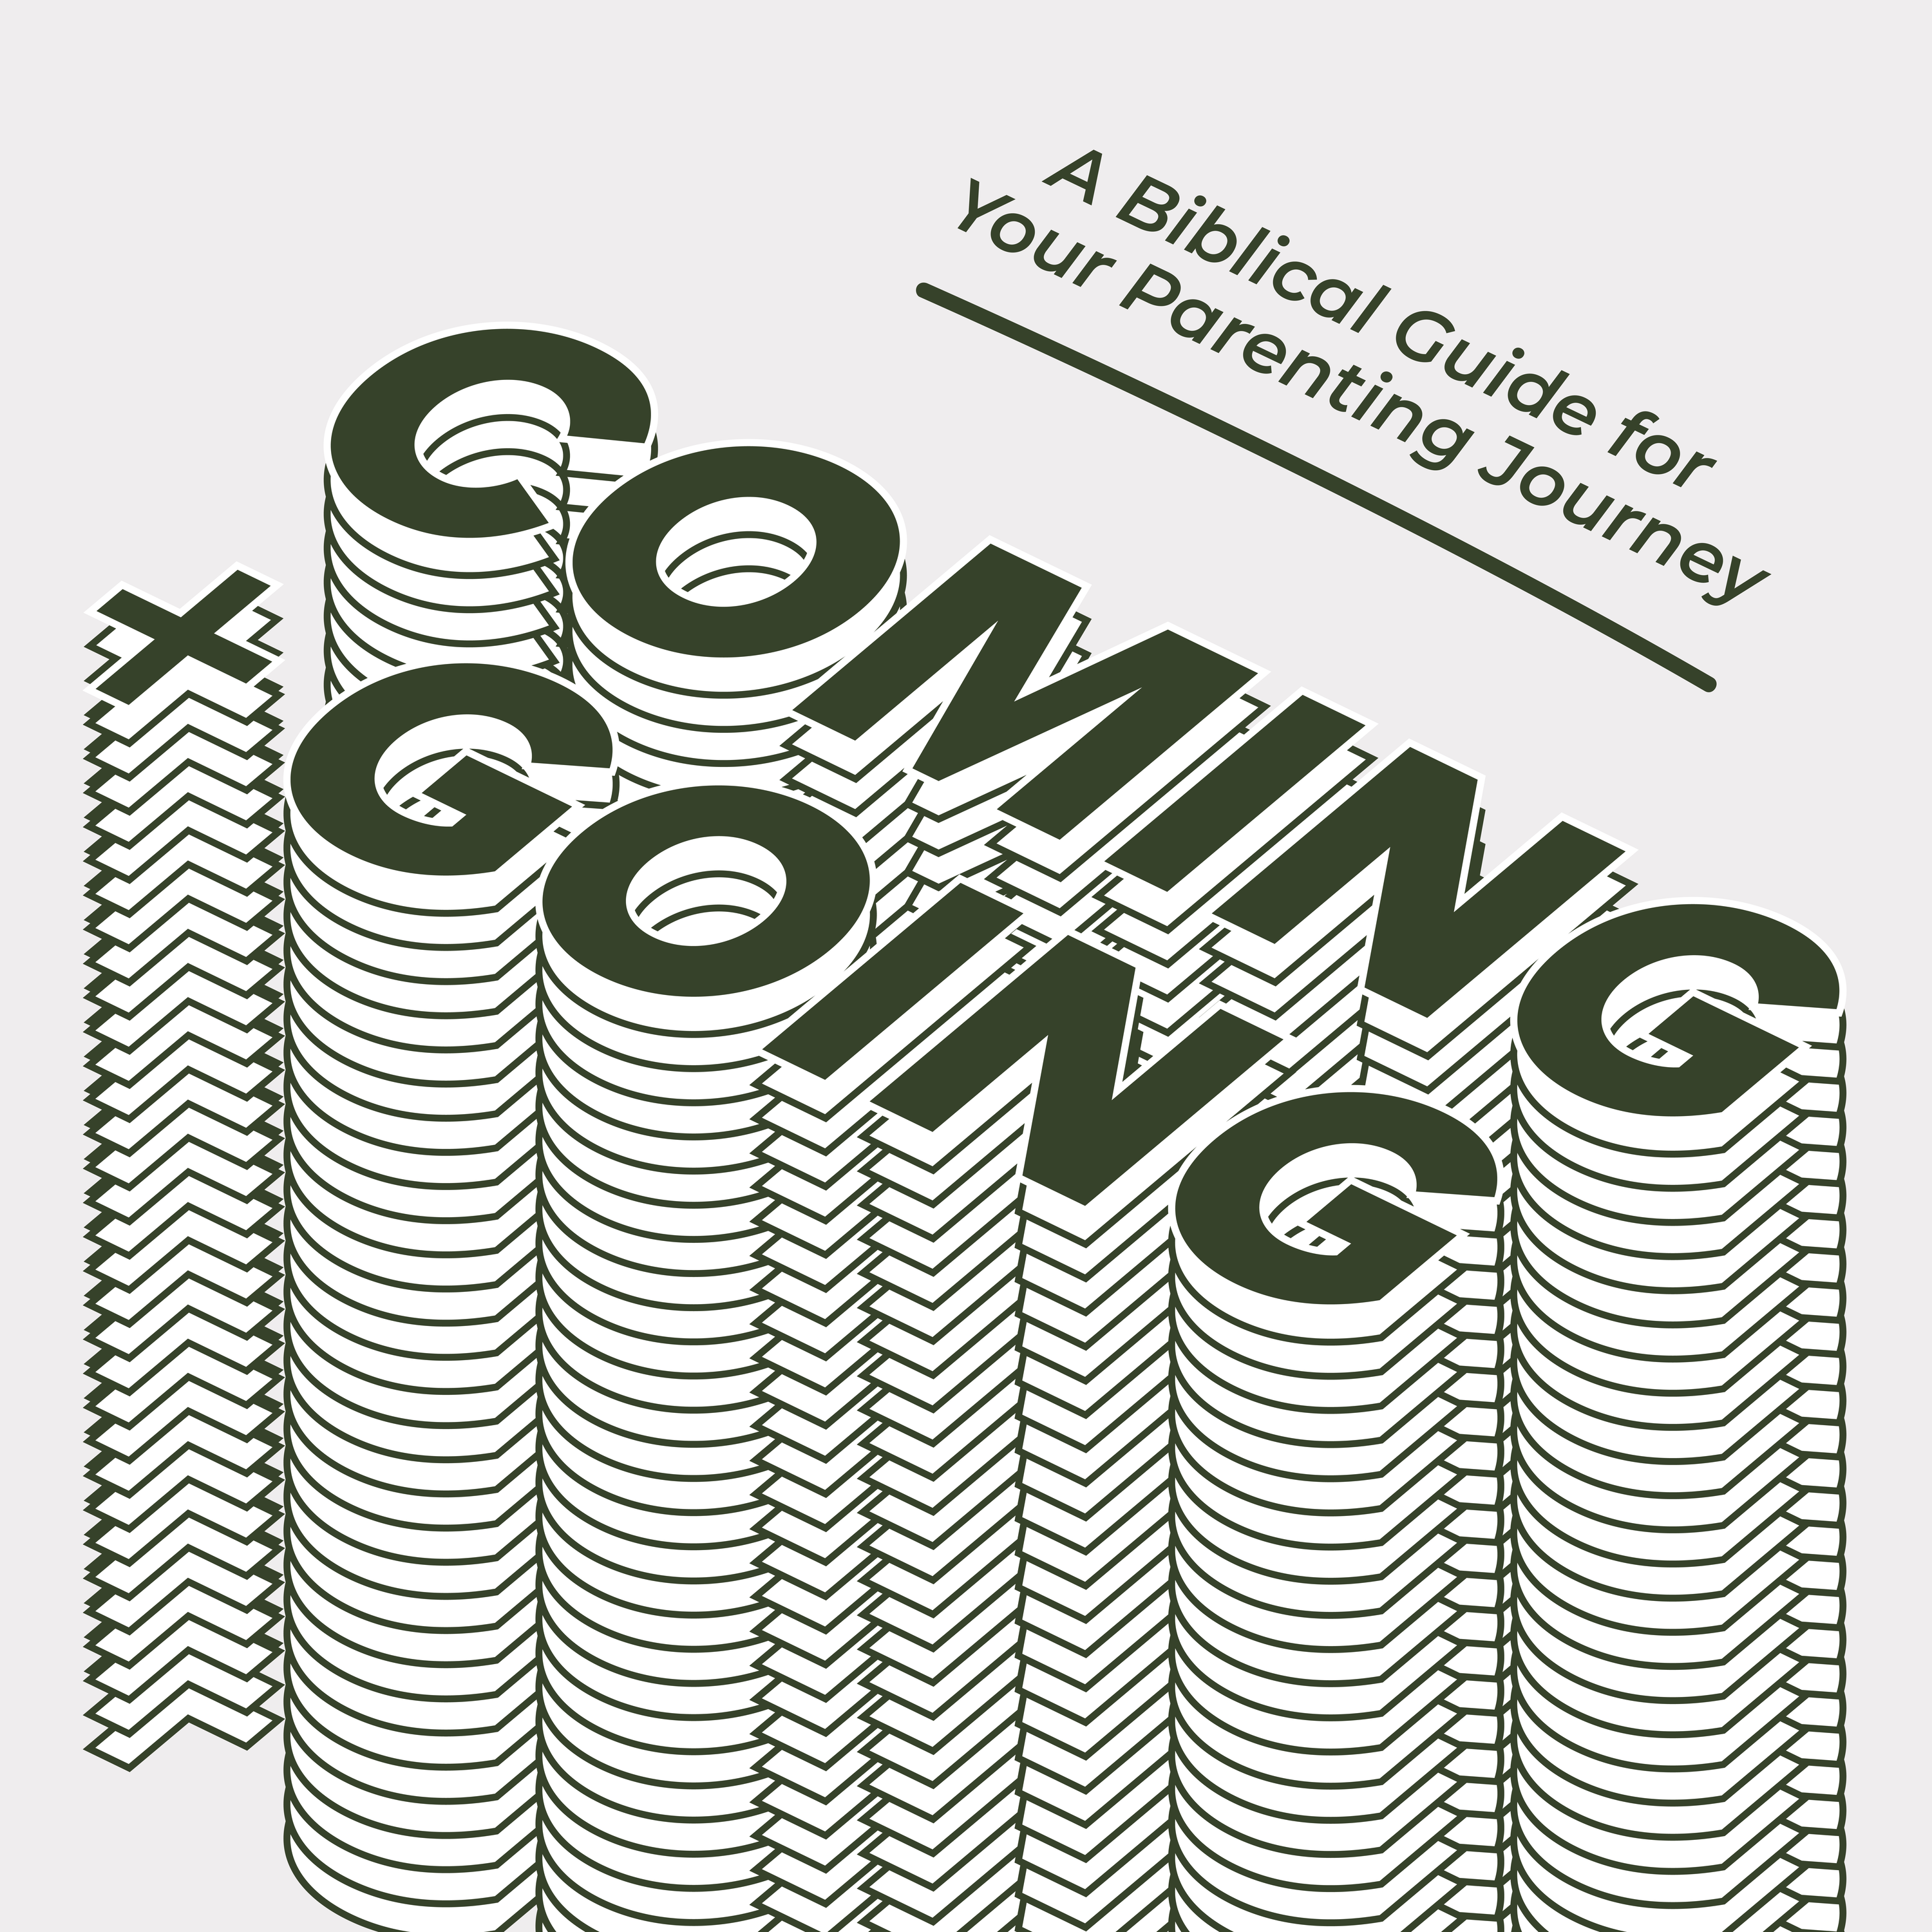 Coming & Going - A Biblical Guide for your Parenting Journey